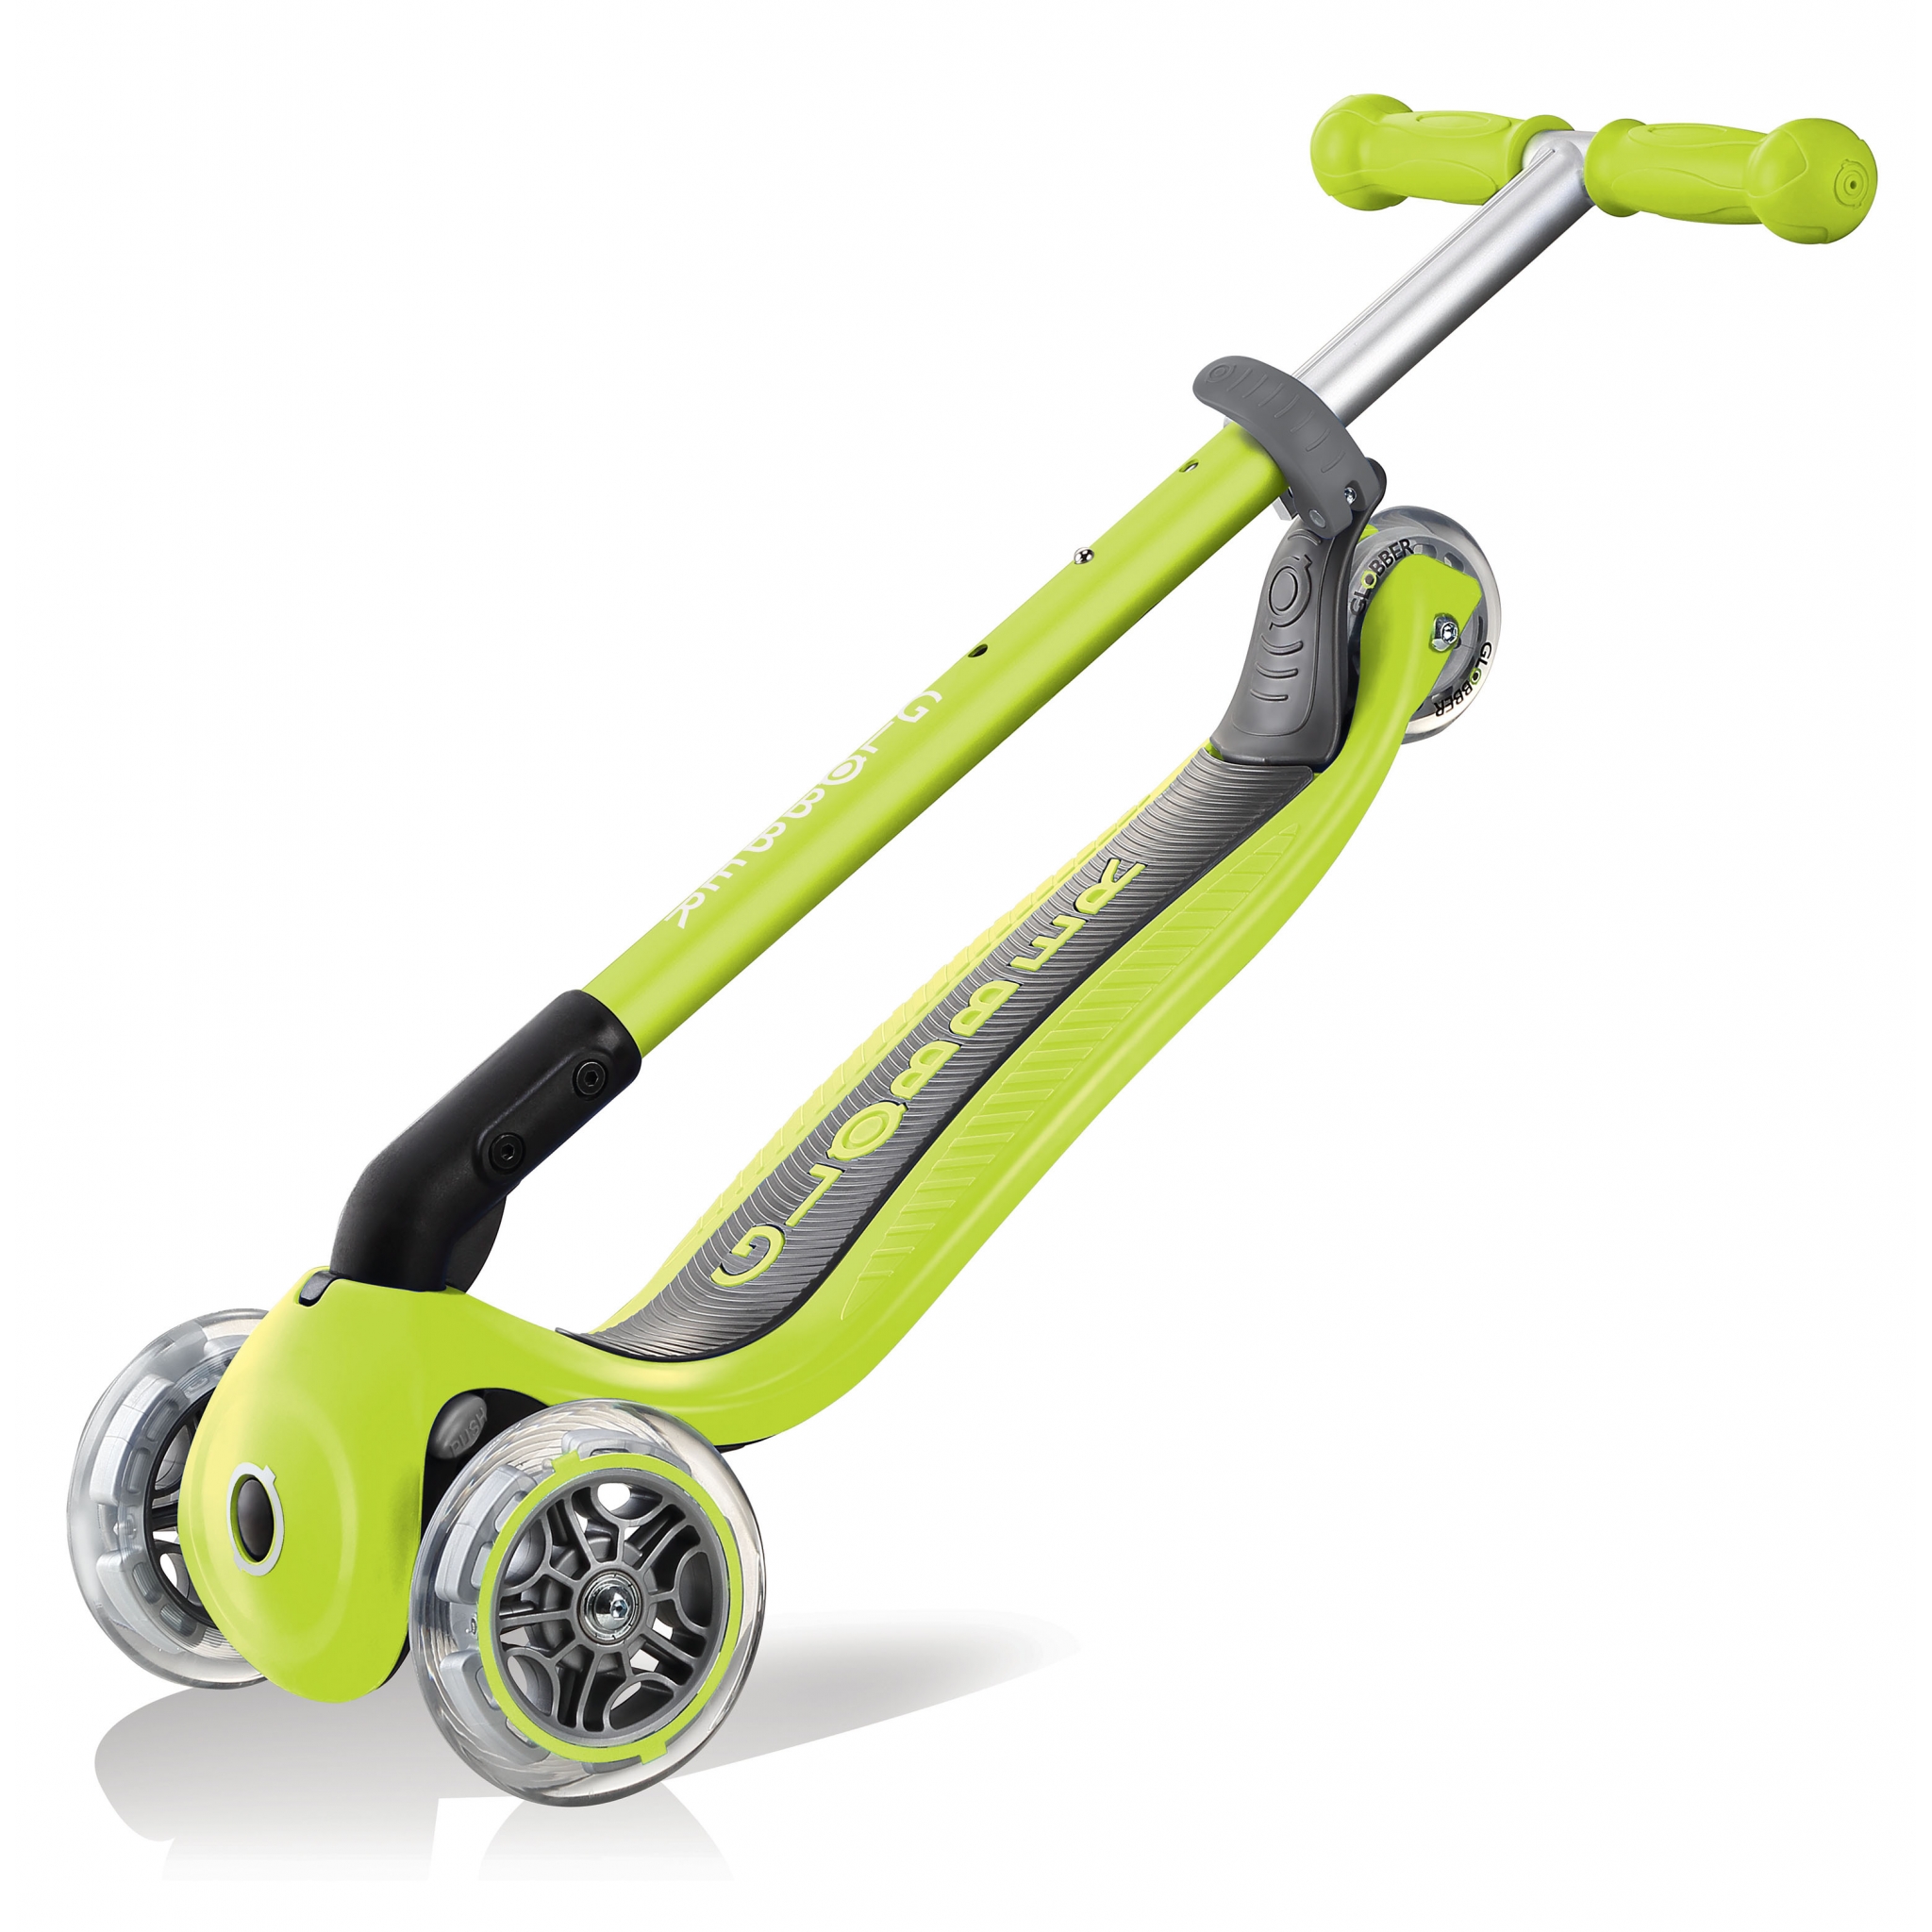 PRIMO-FOLDABLE-3-wheel-foldable-scooter-for-kids-trolley-mode-lime-green 4